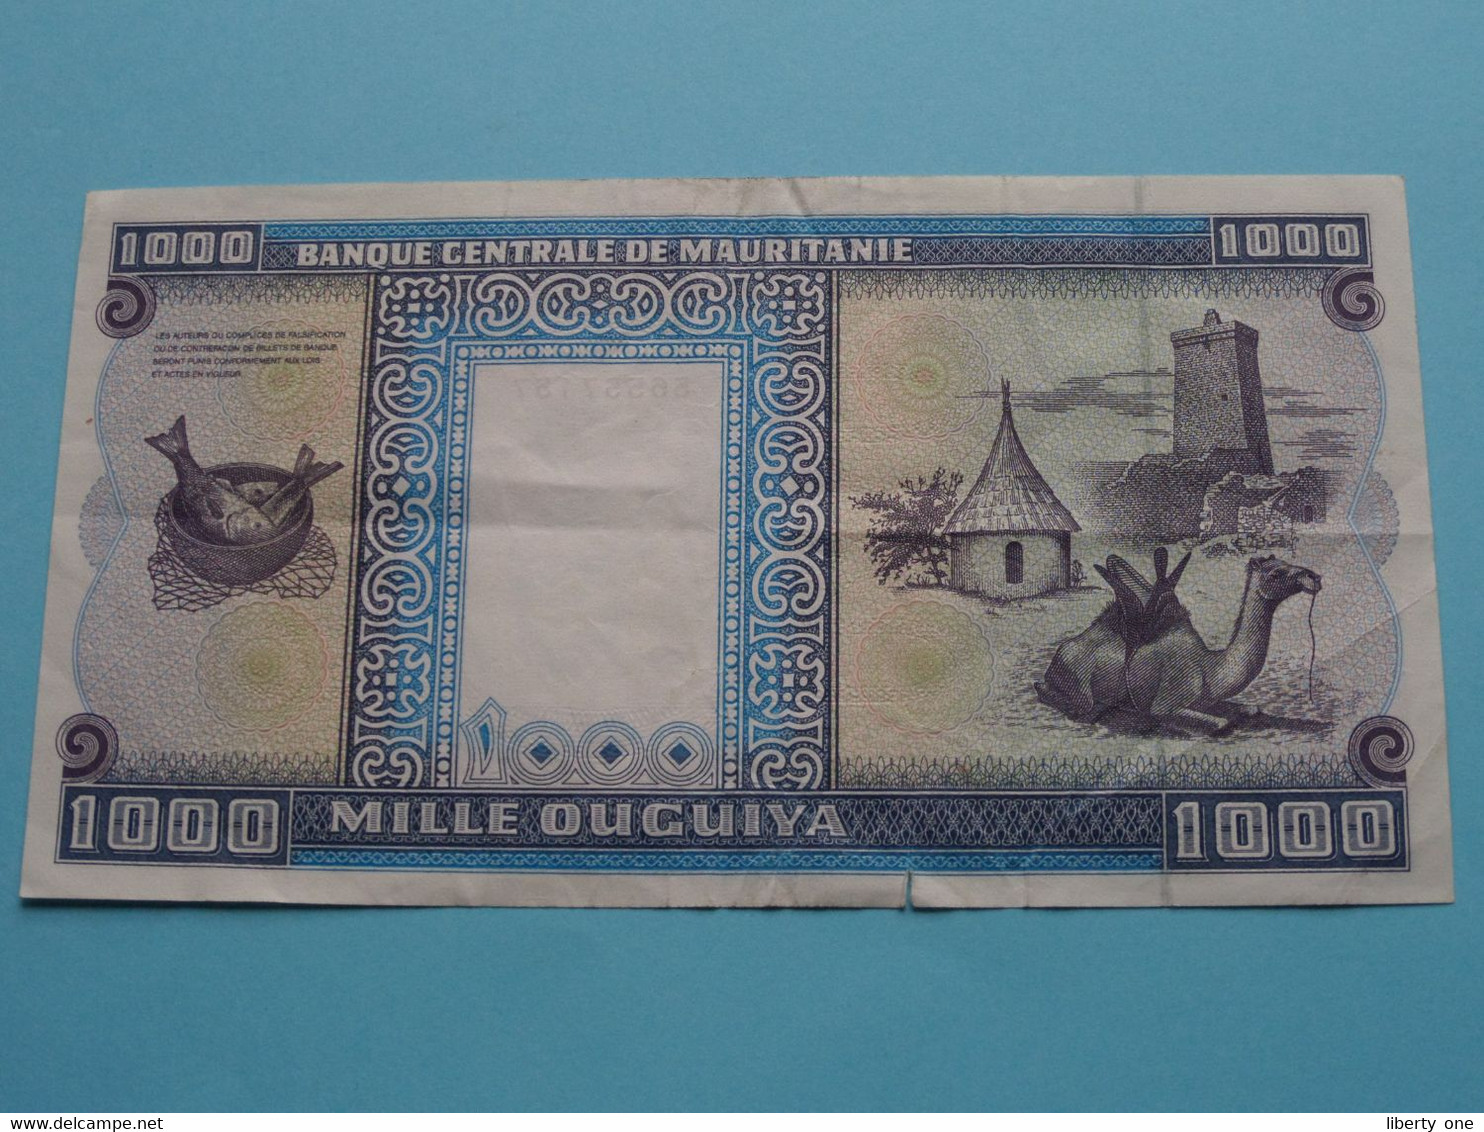 1000 Mille OUGUIYA - 28/11/1993 ( For Grade, Please See SCANS ) Circulated ( Small Tear ) ! - Mauritanien